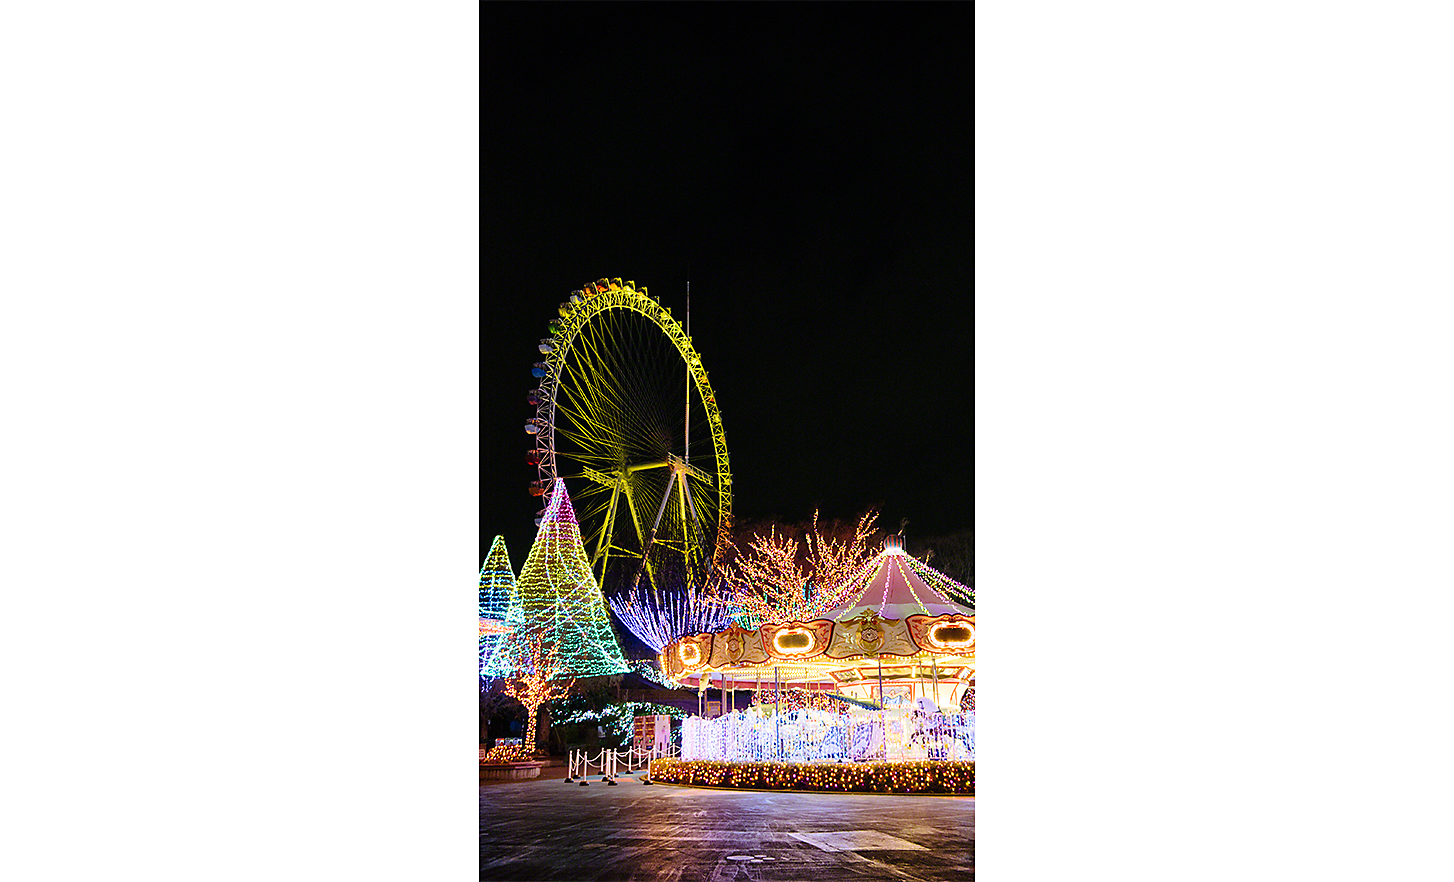 Image showing the colourful lights of a fairground at night